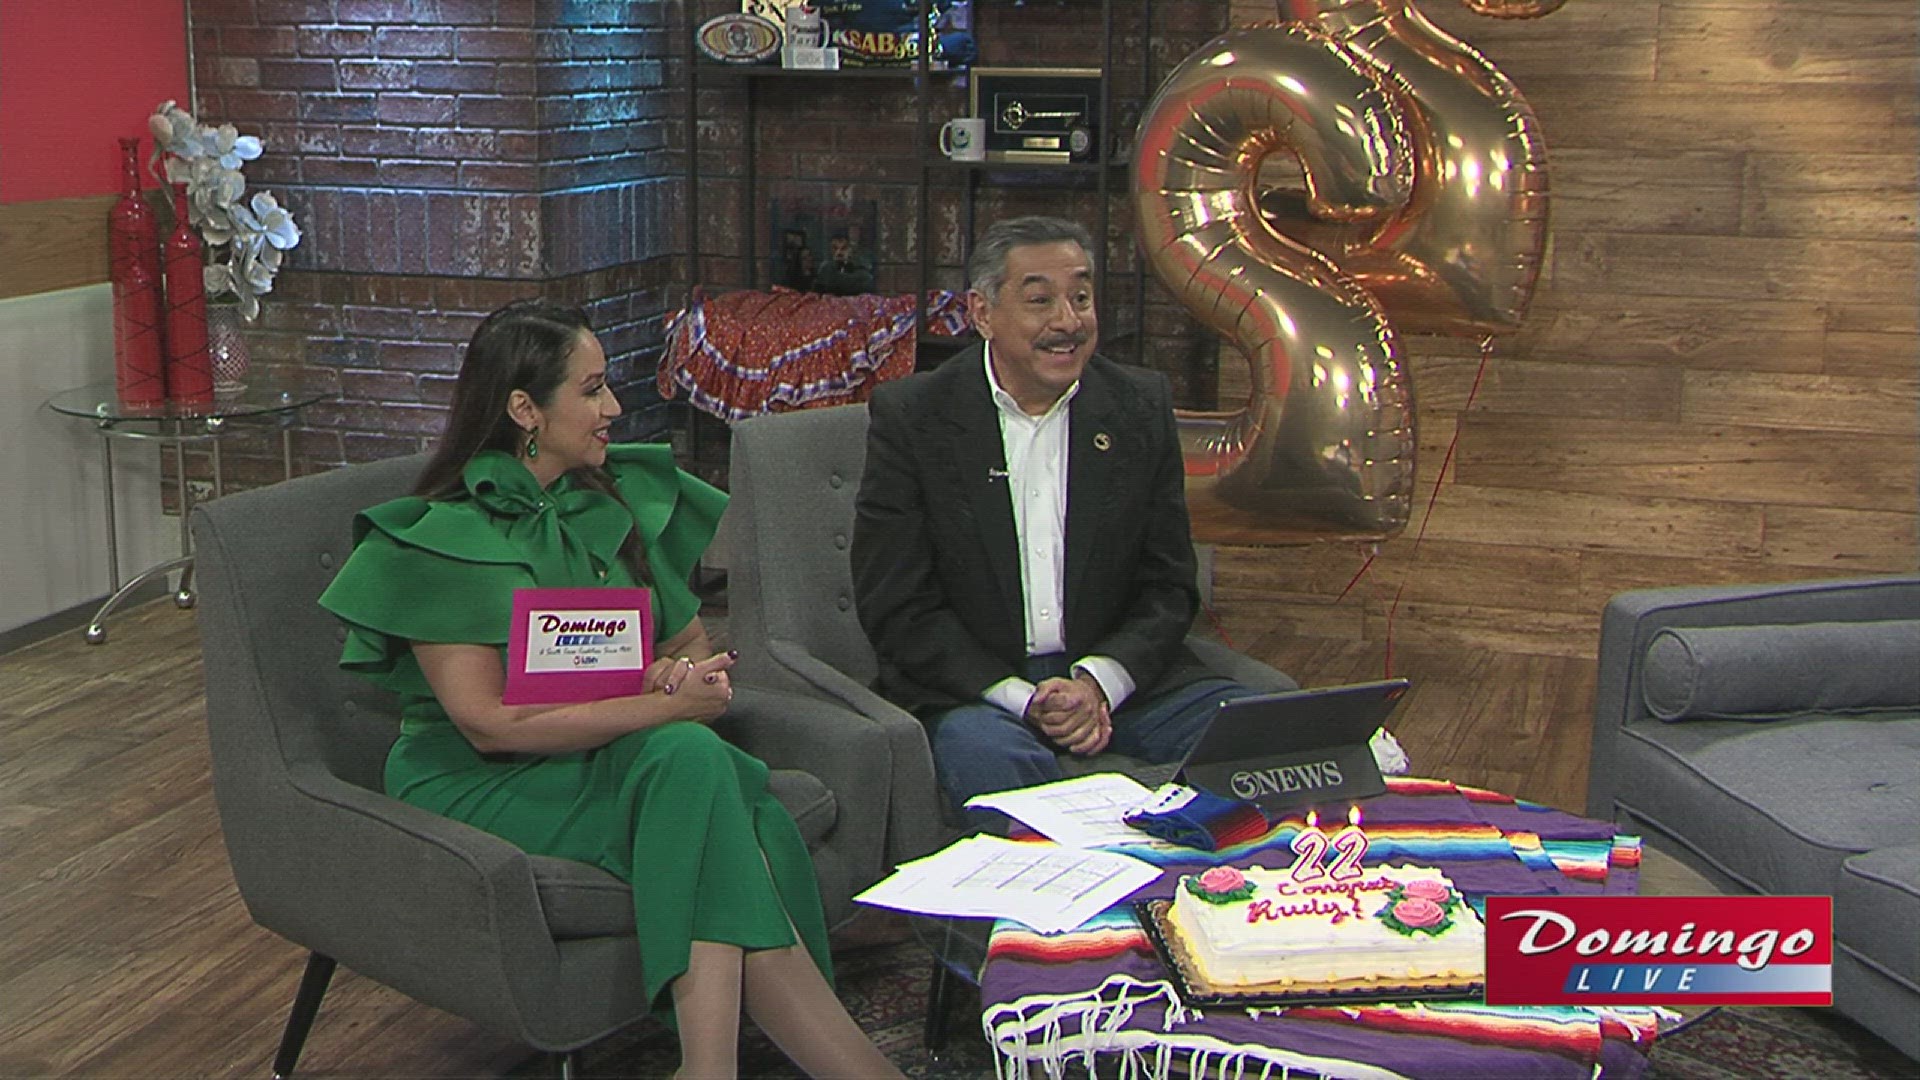 Today marks 22 years of Rudy Treviño's tenure as co-host of Domingo Live. Congratulations, Rudy!